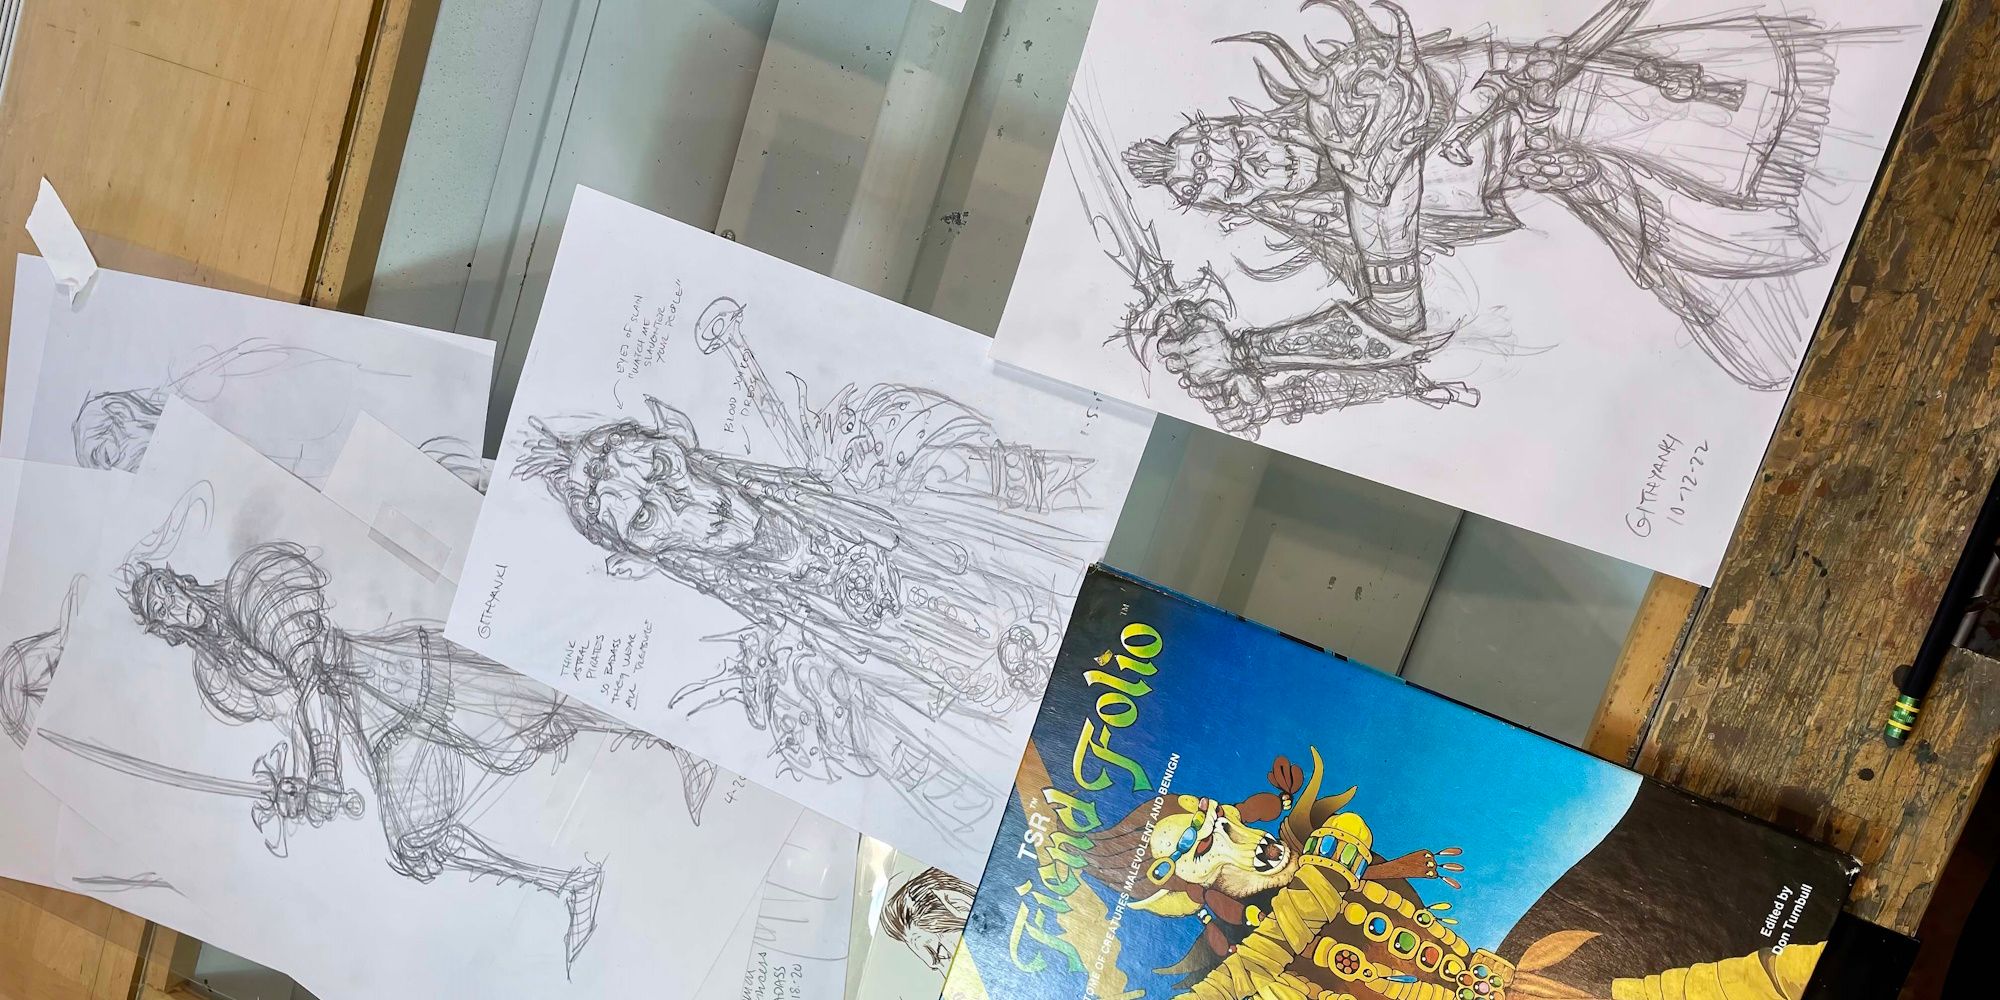 Githyanki sketches by Tony DiTerlizzi along with the original TSR Fiend Folo for DnD Planescape